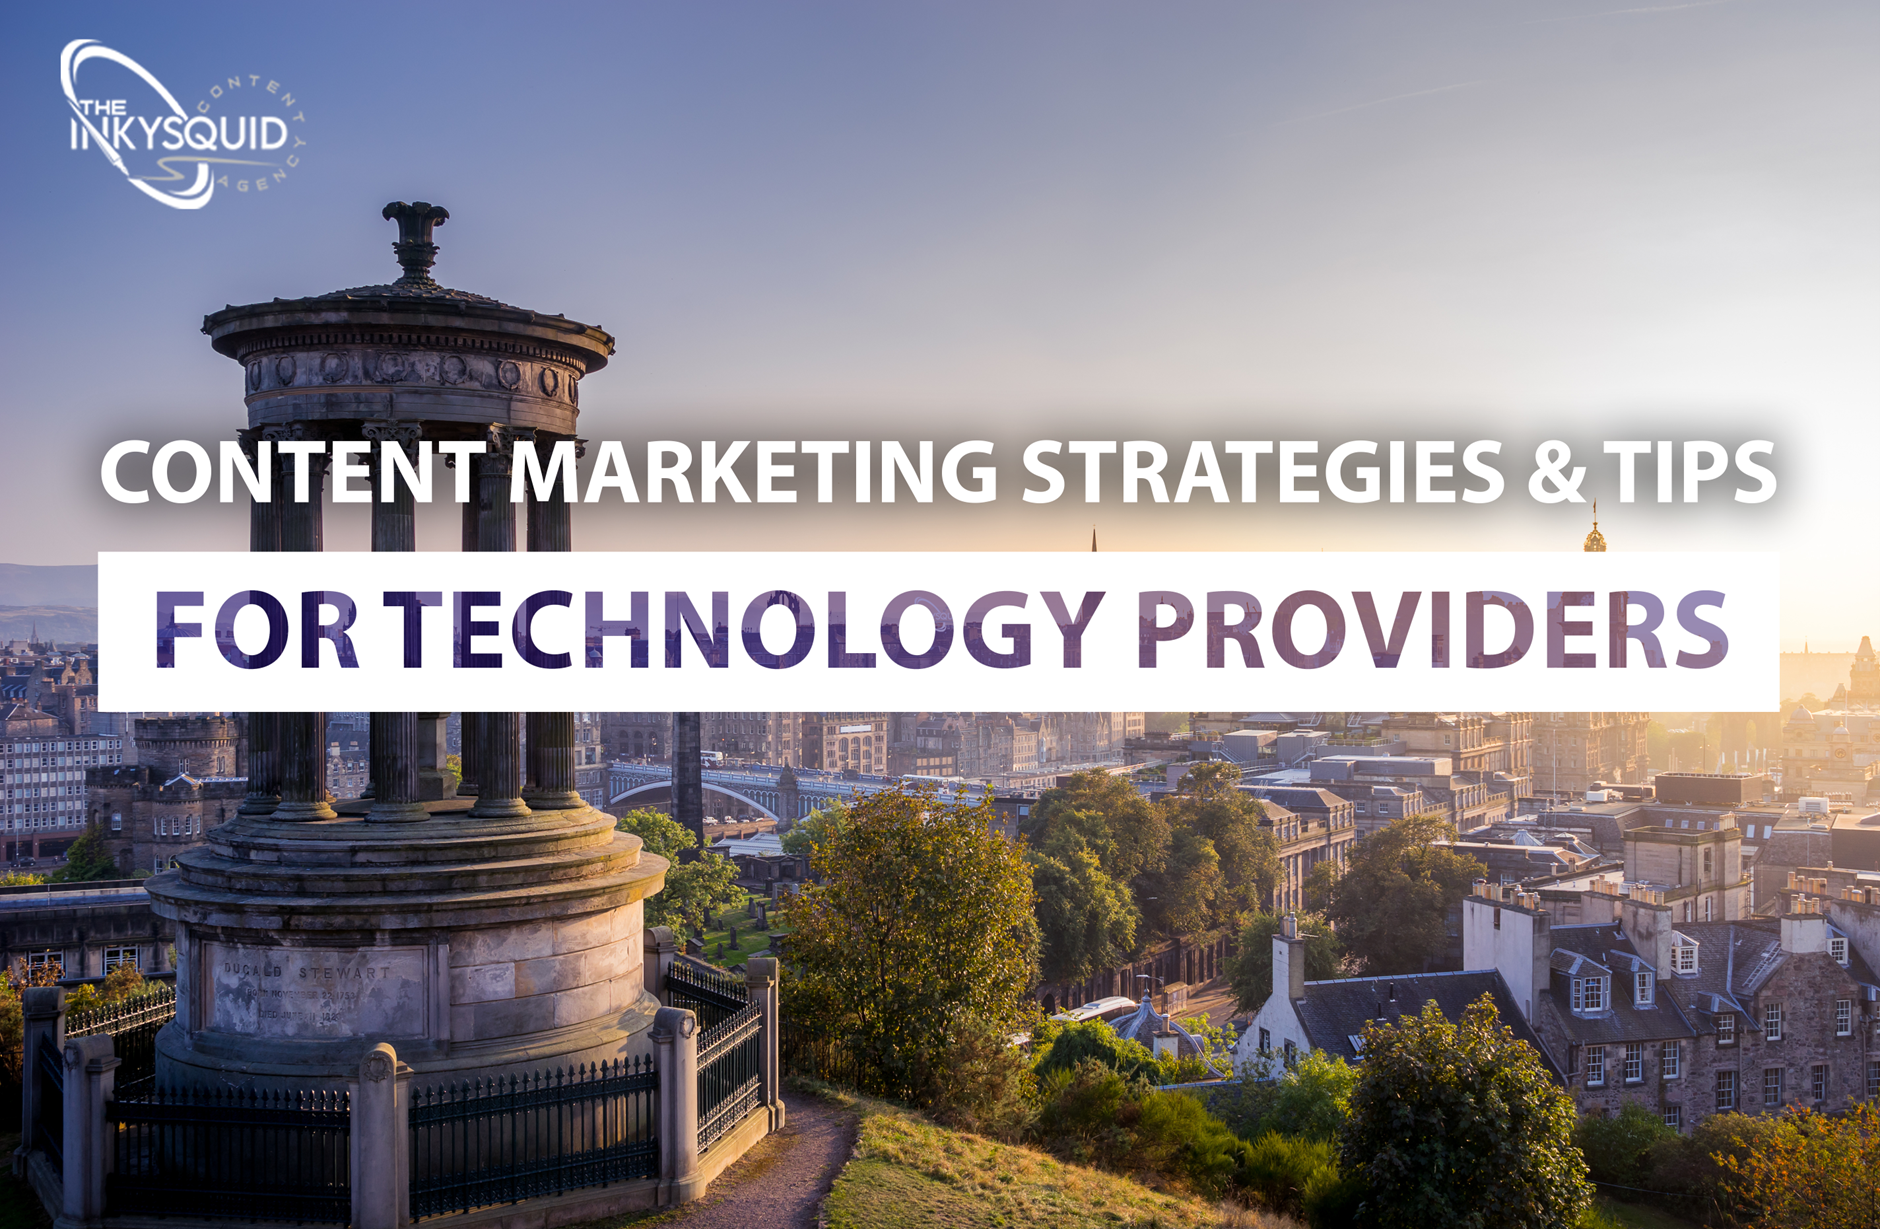 Content Marketing Strategies & Tips For Technology Providers